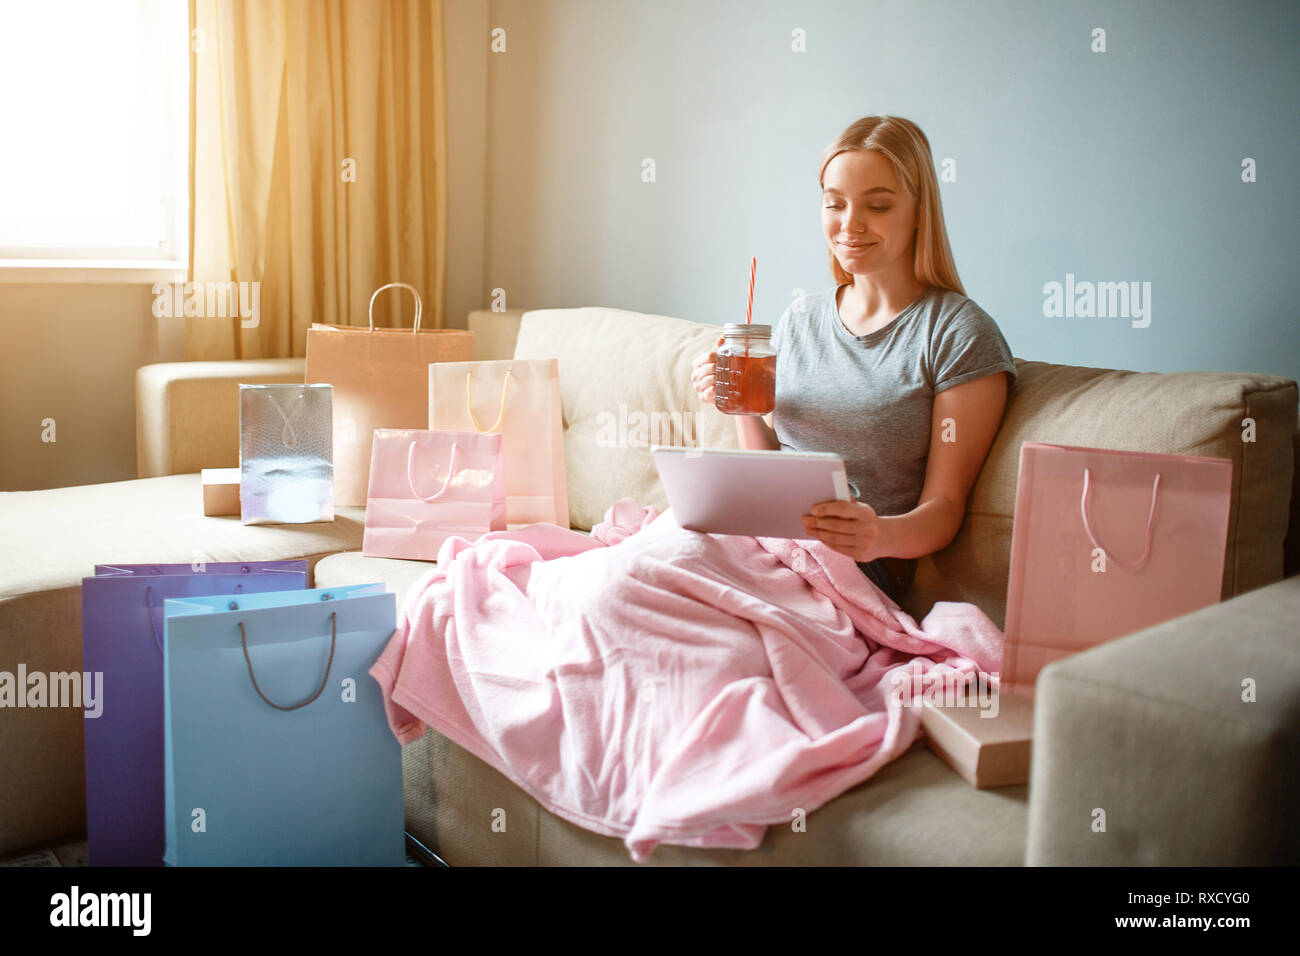 Online shopping at home. Young blonde woman with tea is looking at tablet and choosing goods in online shop while sitting with blanket on a sofa Stock Photo